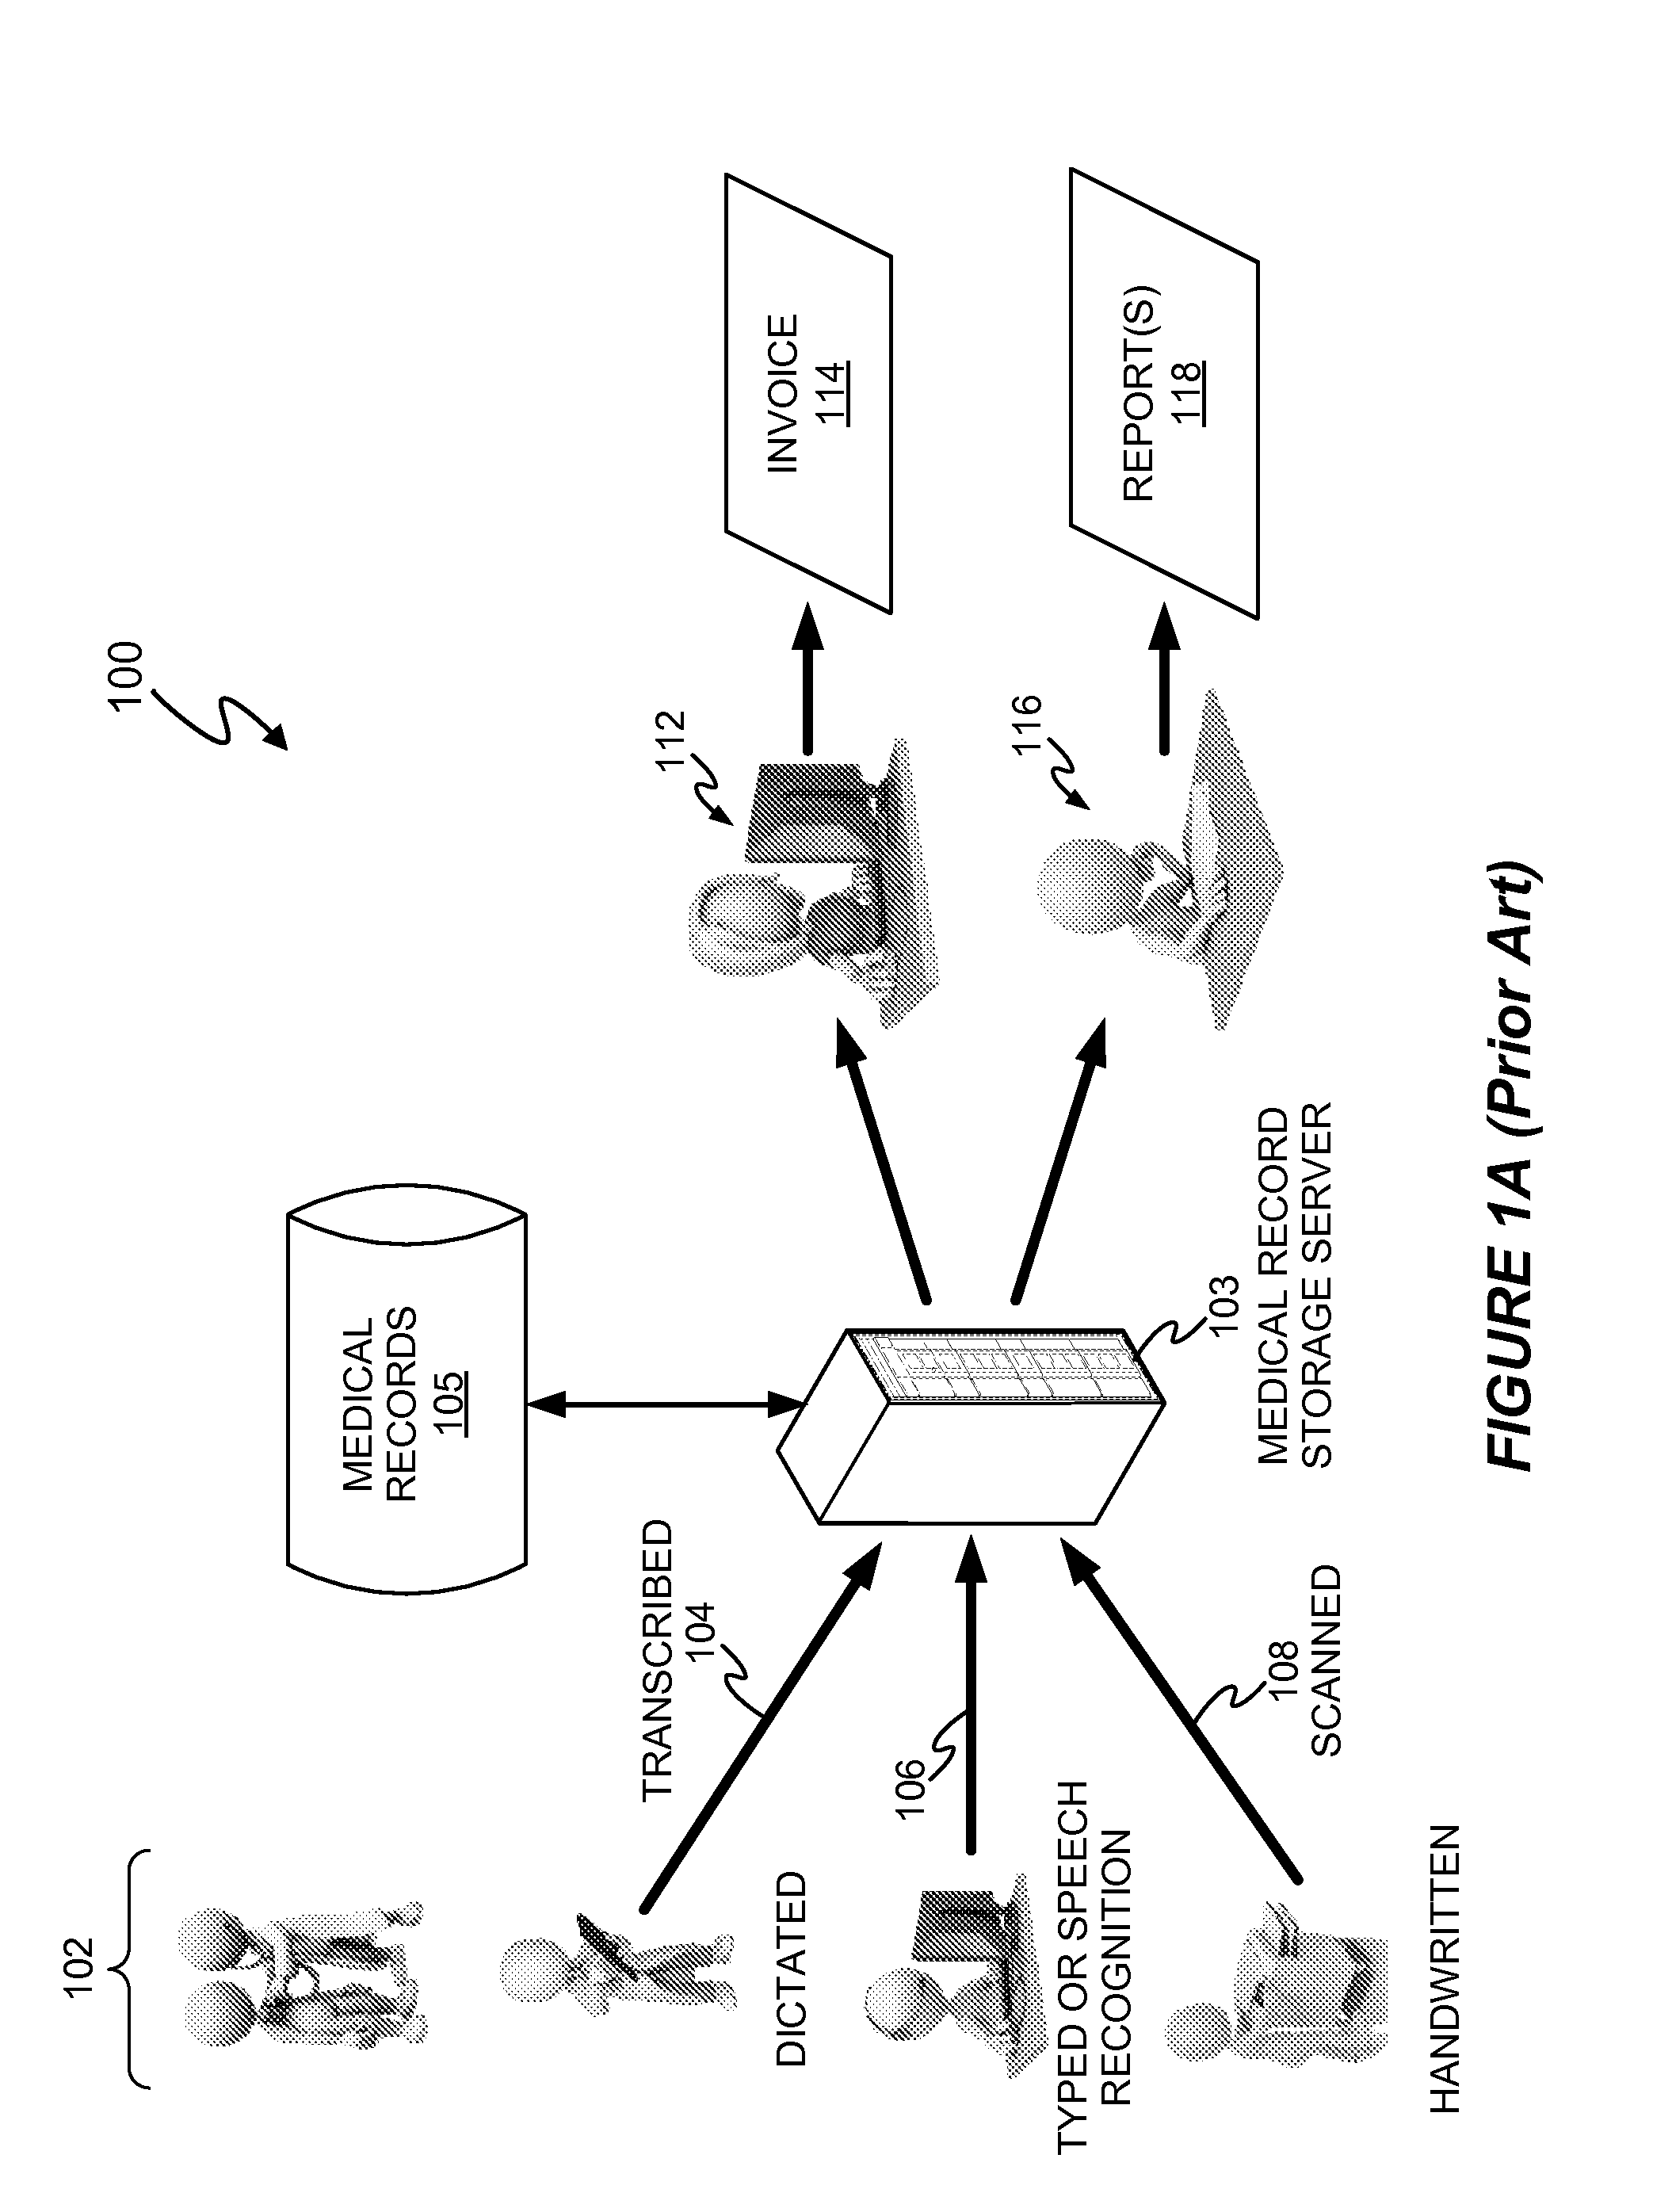 Automated learning for medical data processing system